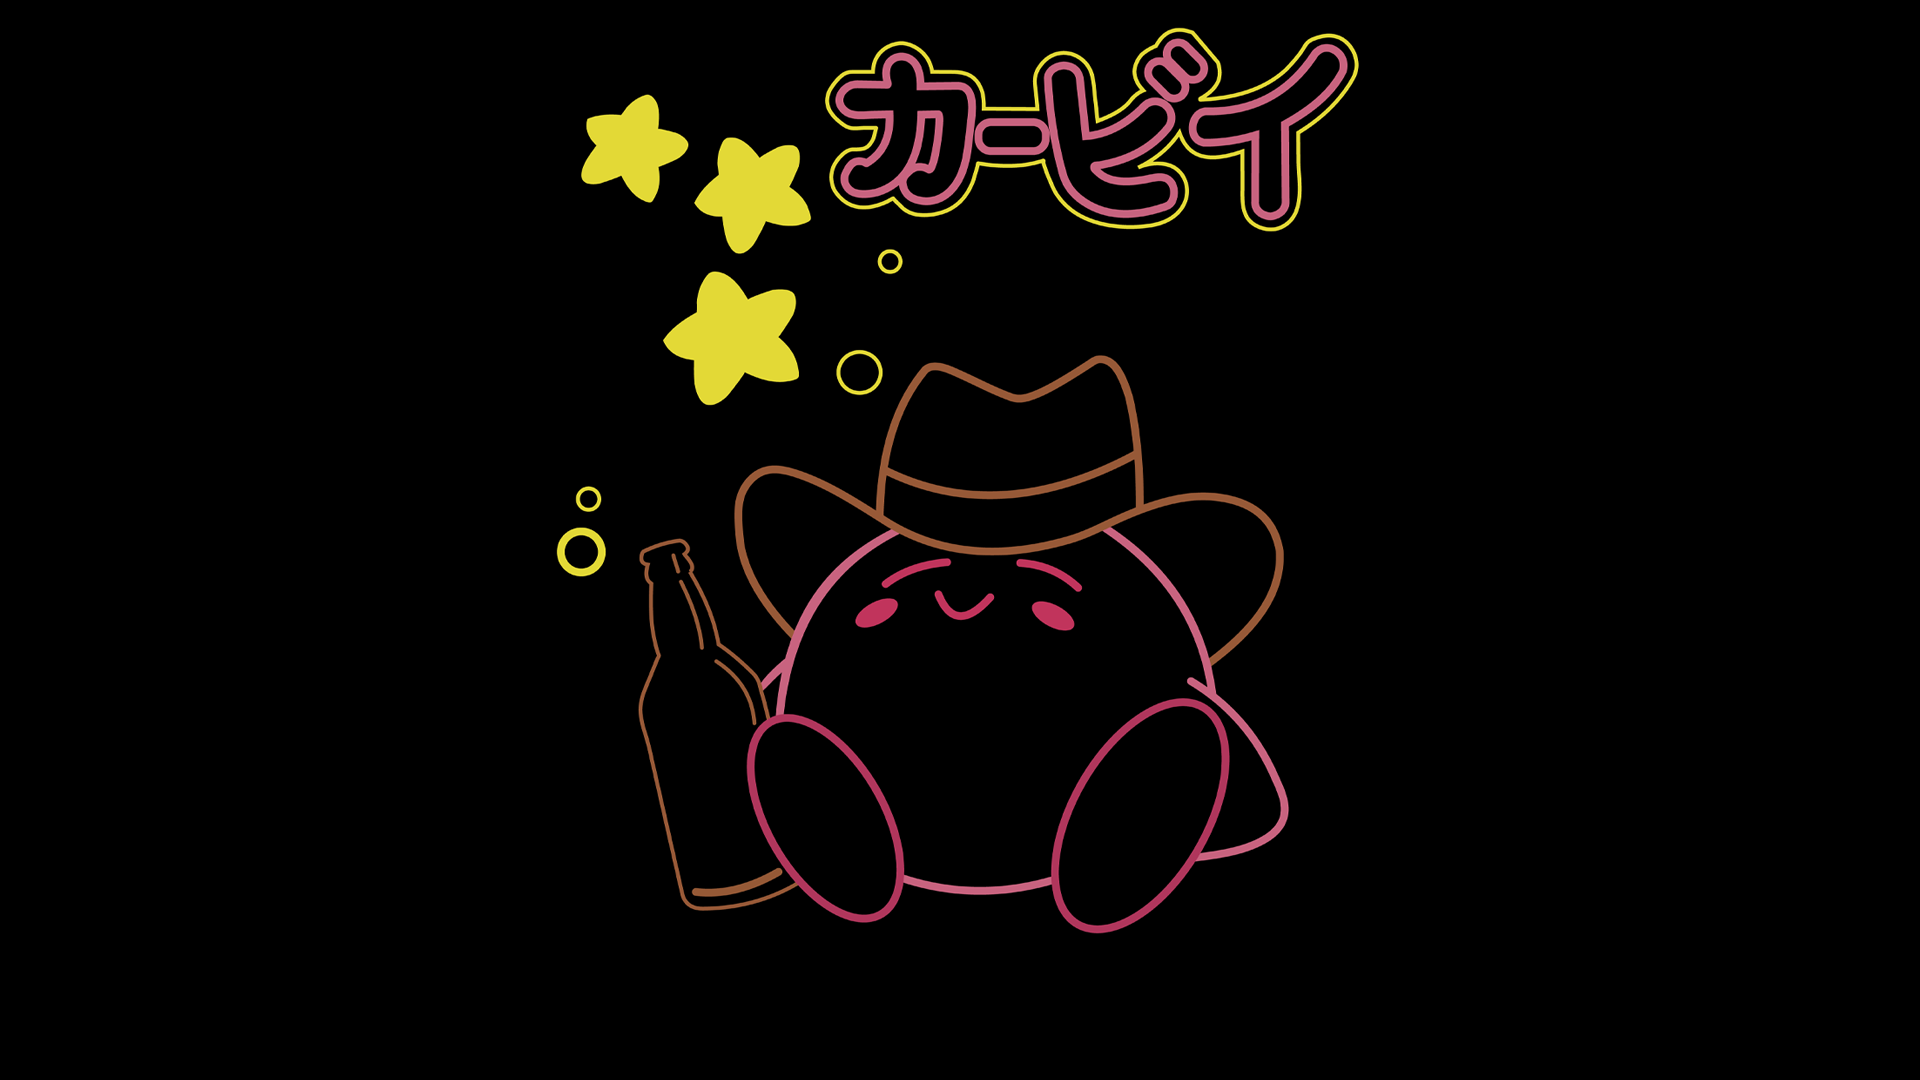 Kirby Nintendo Beer Cowboy Hats Black Background Sitting Video Game Characters Video Games Vector Ve 1920x1080